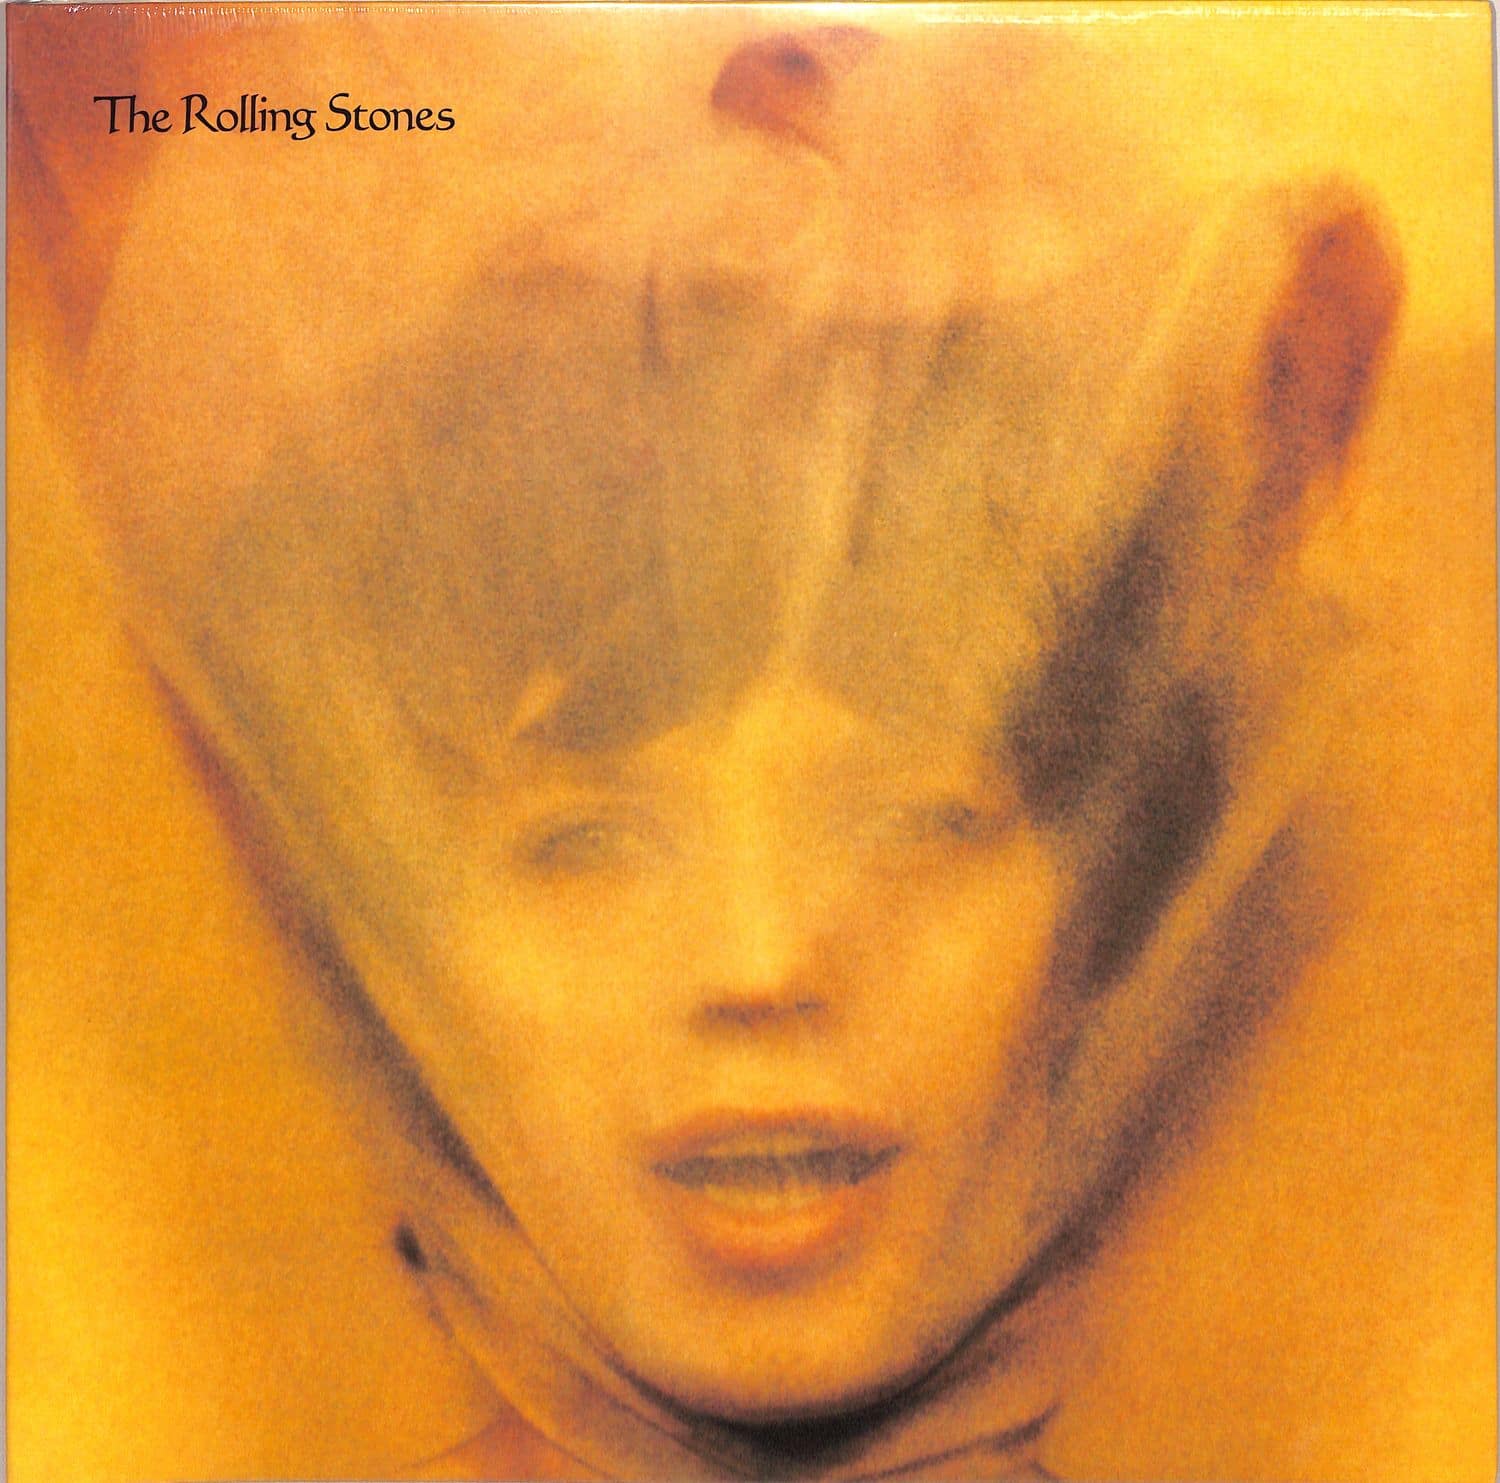 The Rolling Stones - GOATS HEAD SOUP 